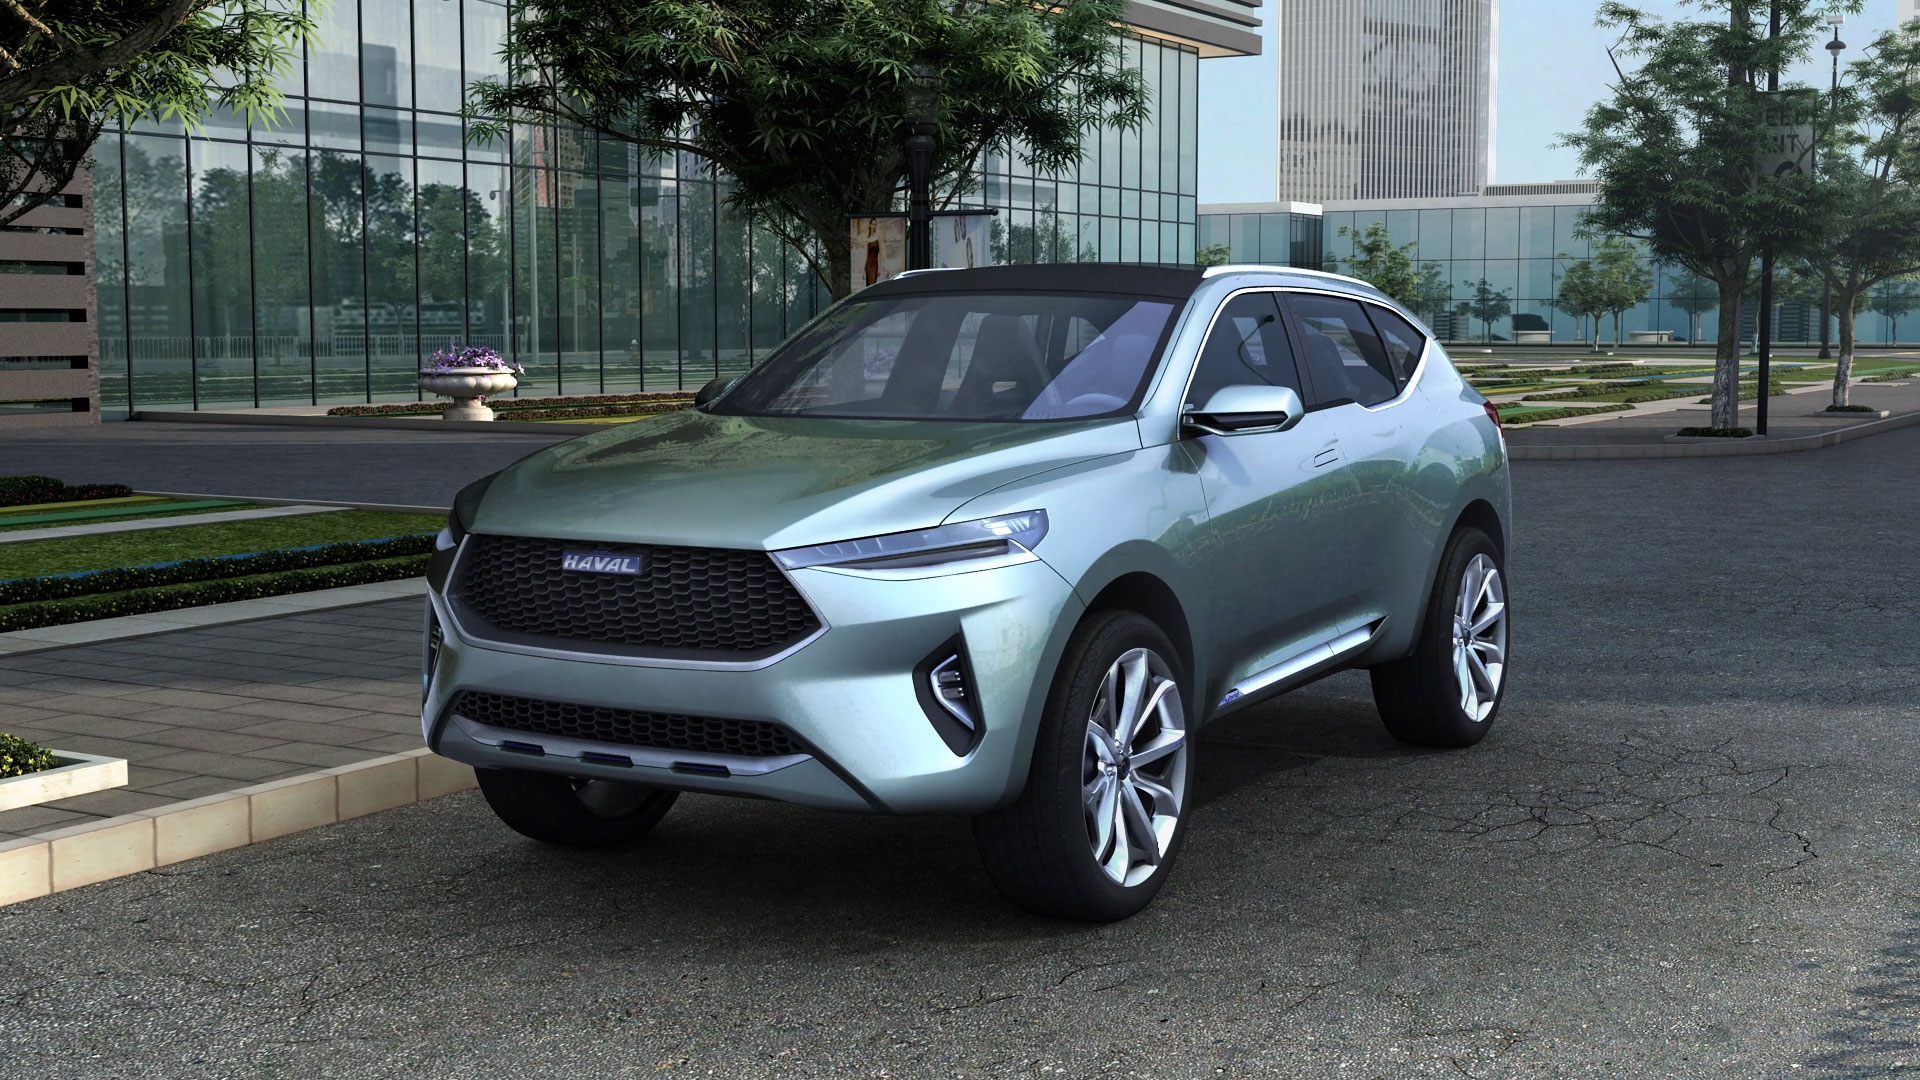 News Haval Details Its HybridElectric Roadmap